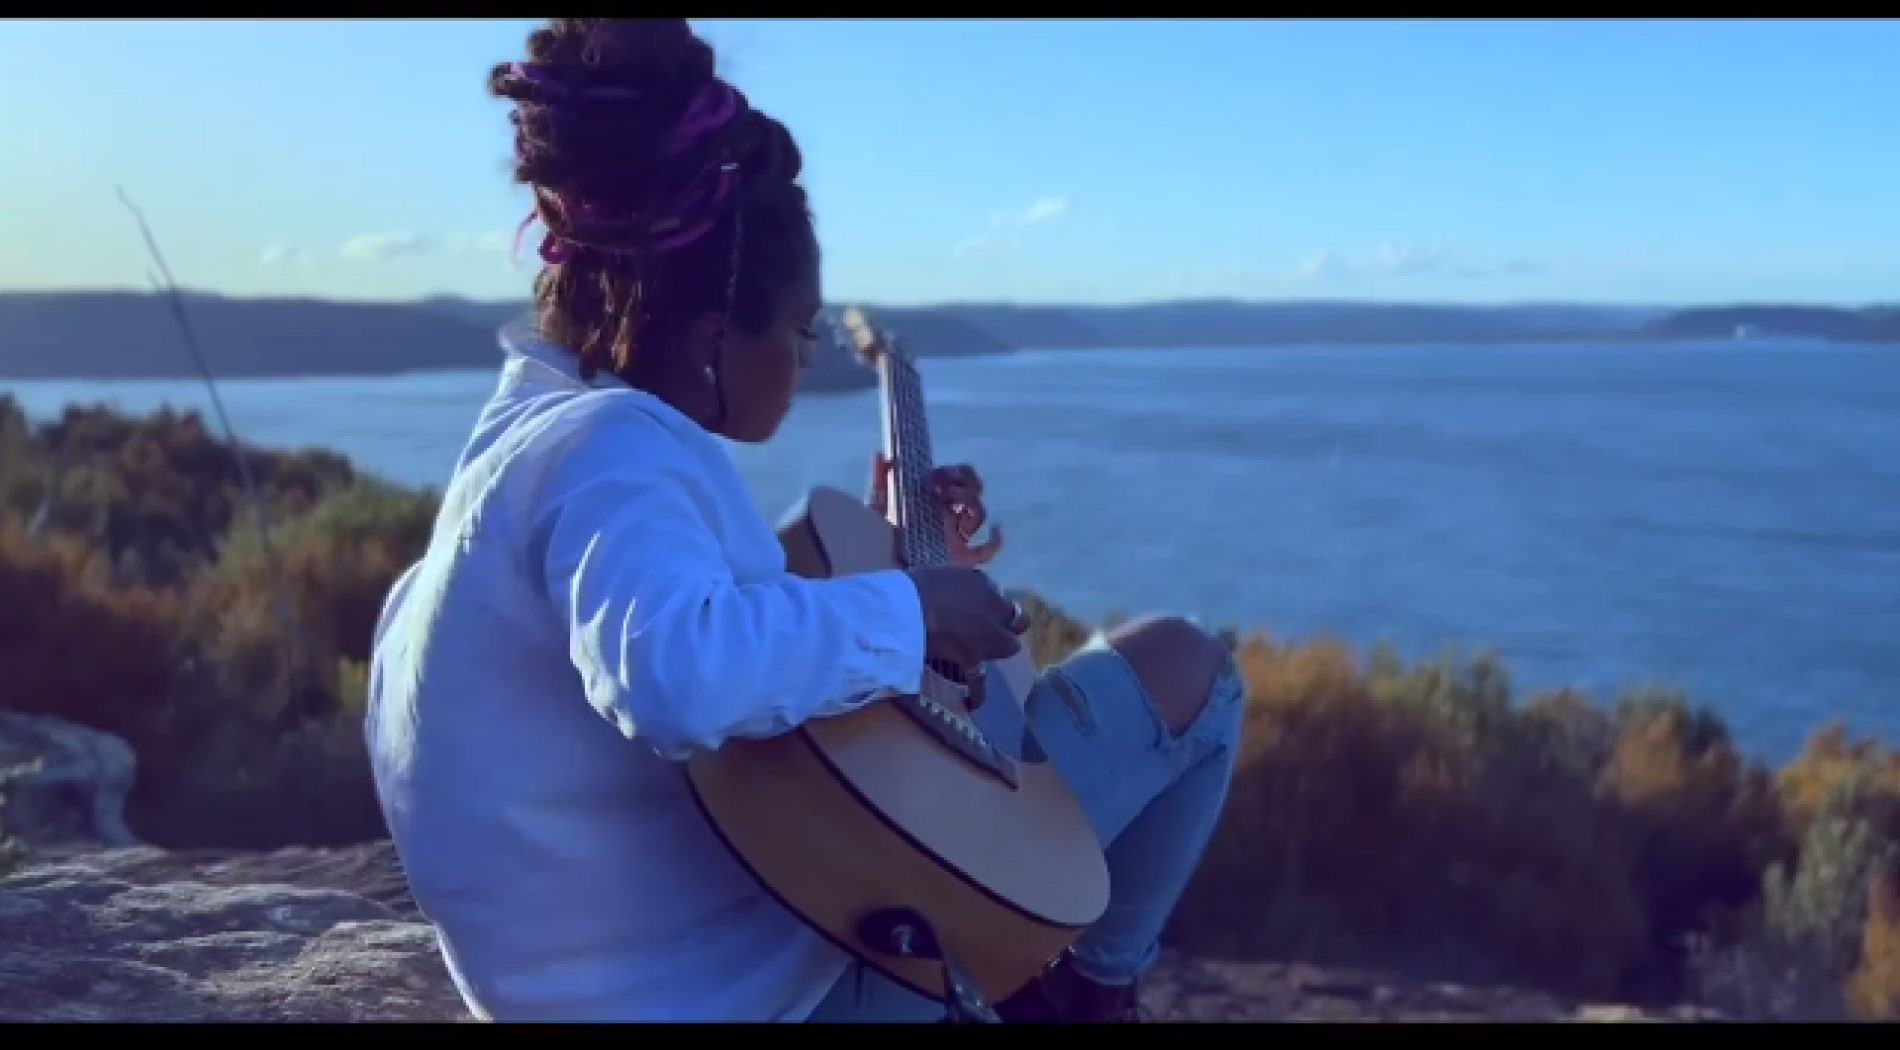 New Music : Roshani – Stay (Official Video)